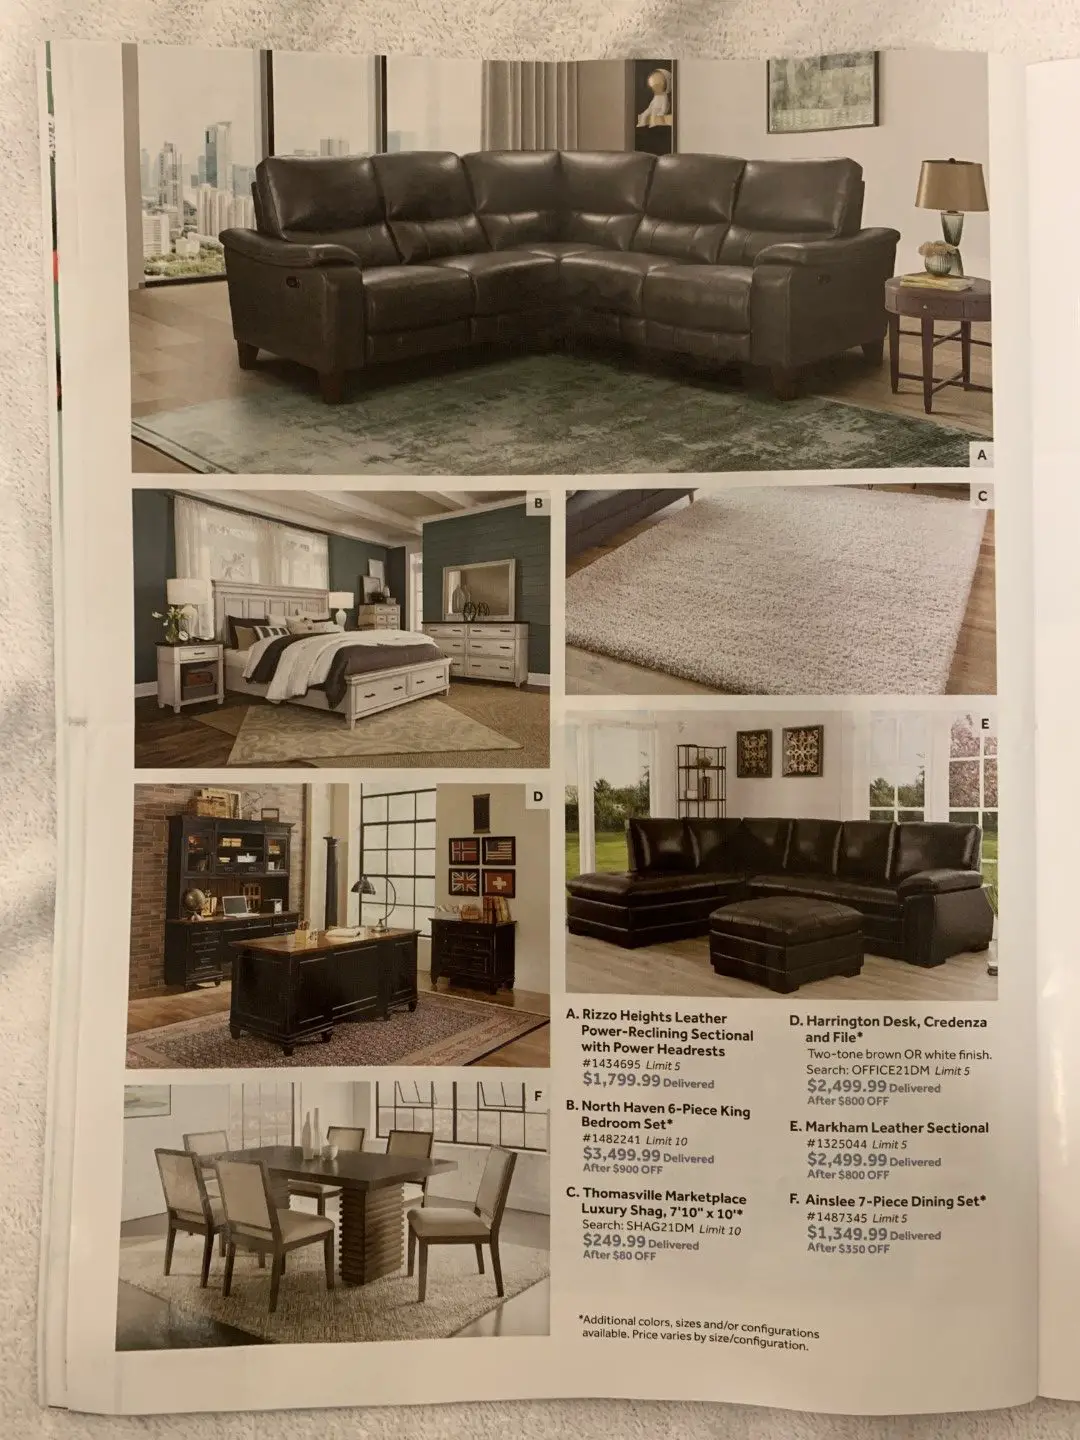 Costco Markham Leather Sectional